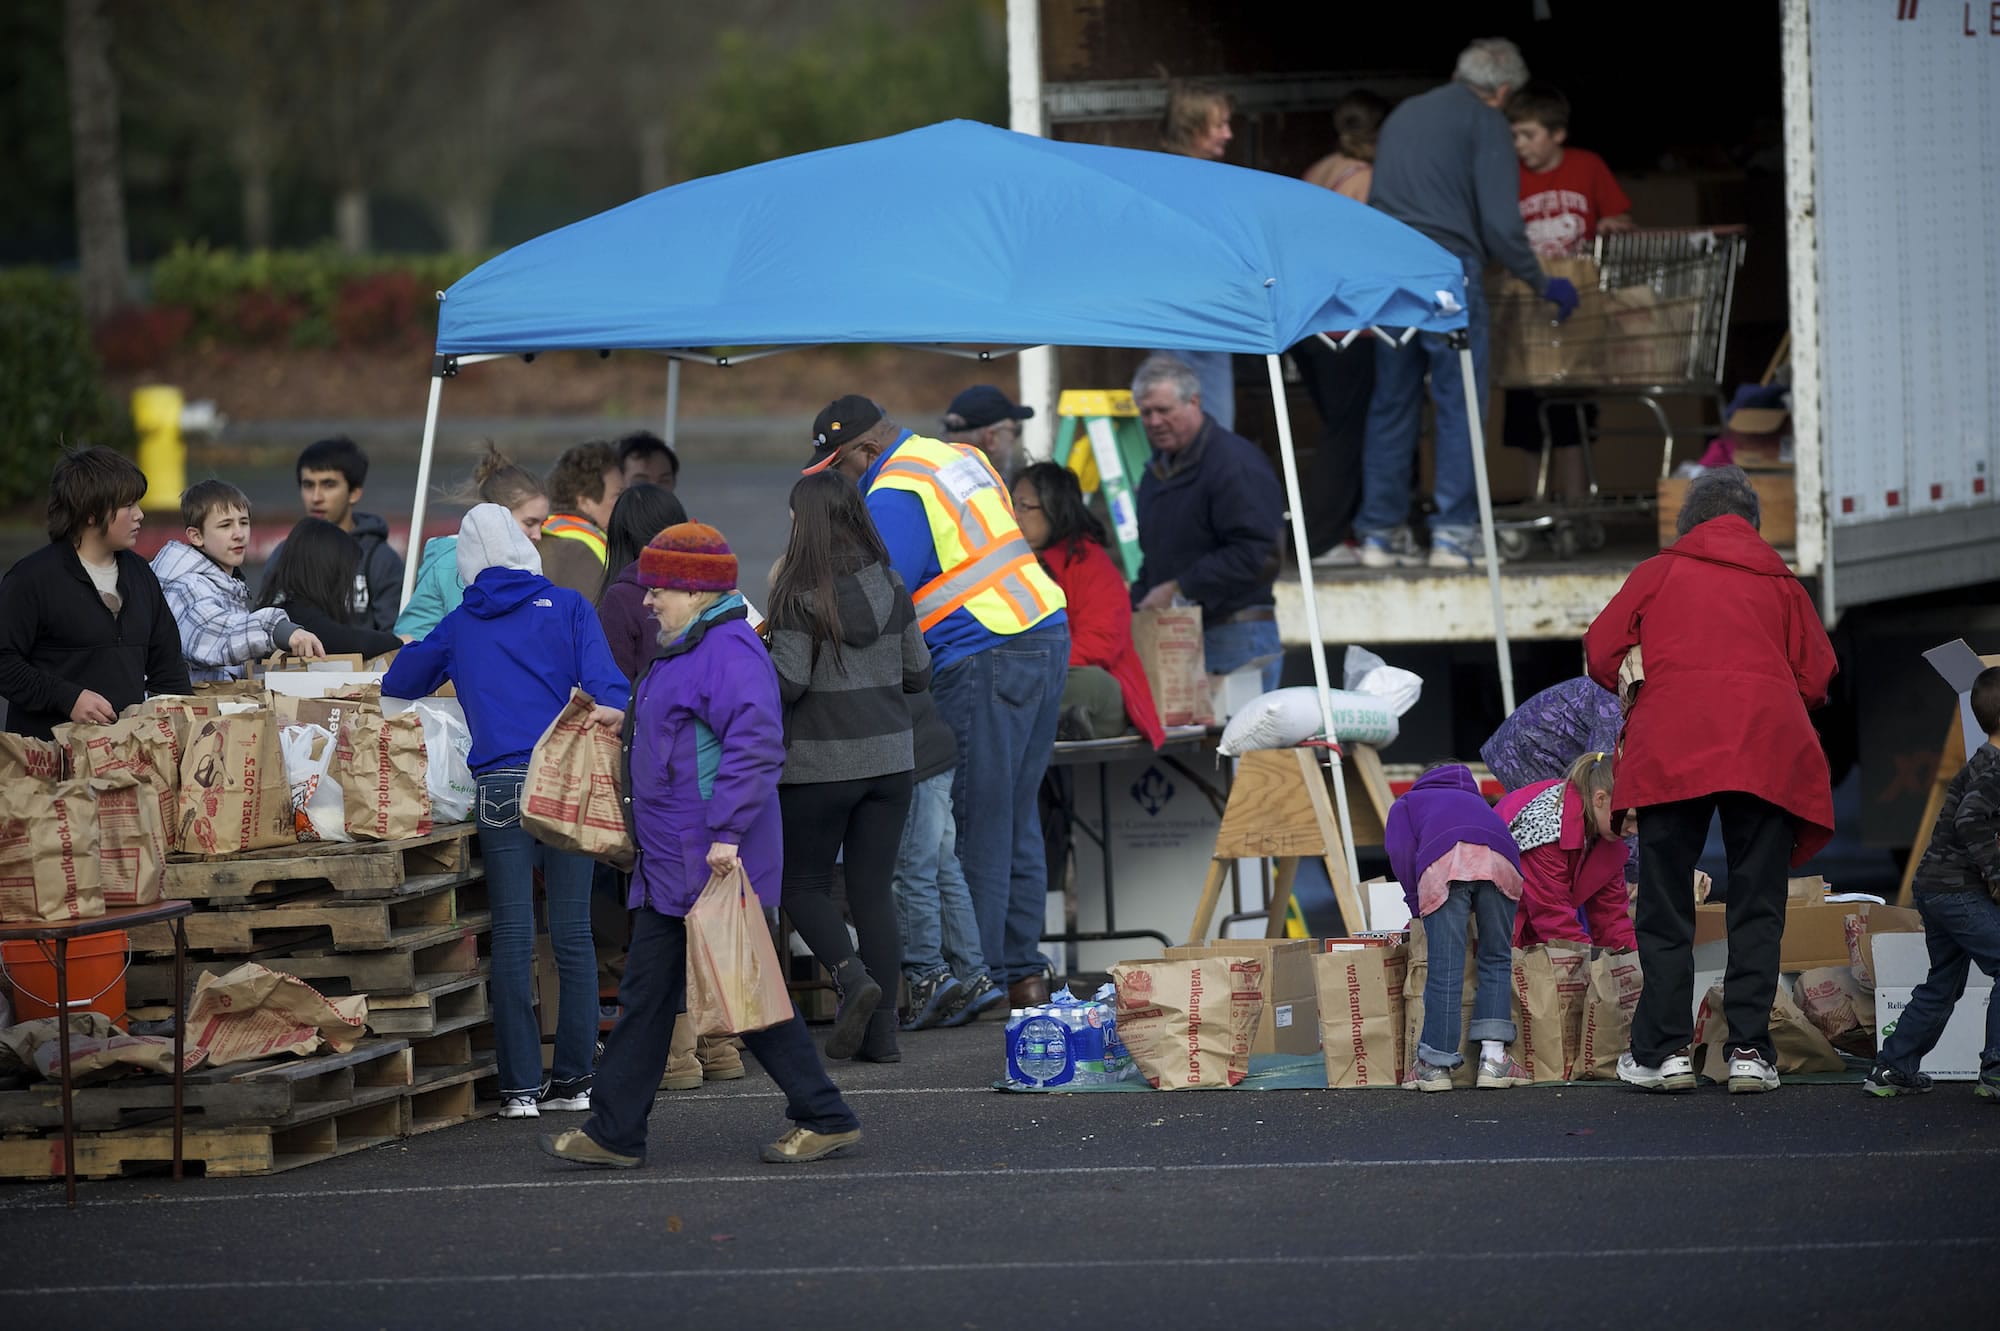 About 3,500 total volunteers turned out for Saturday's annual Walk and Knock food drive, which benefits the Clark County Food Bank and its partner organizations.